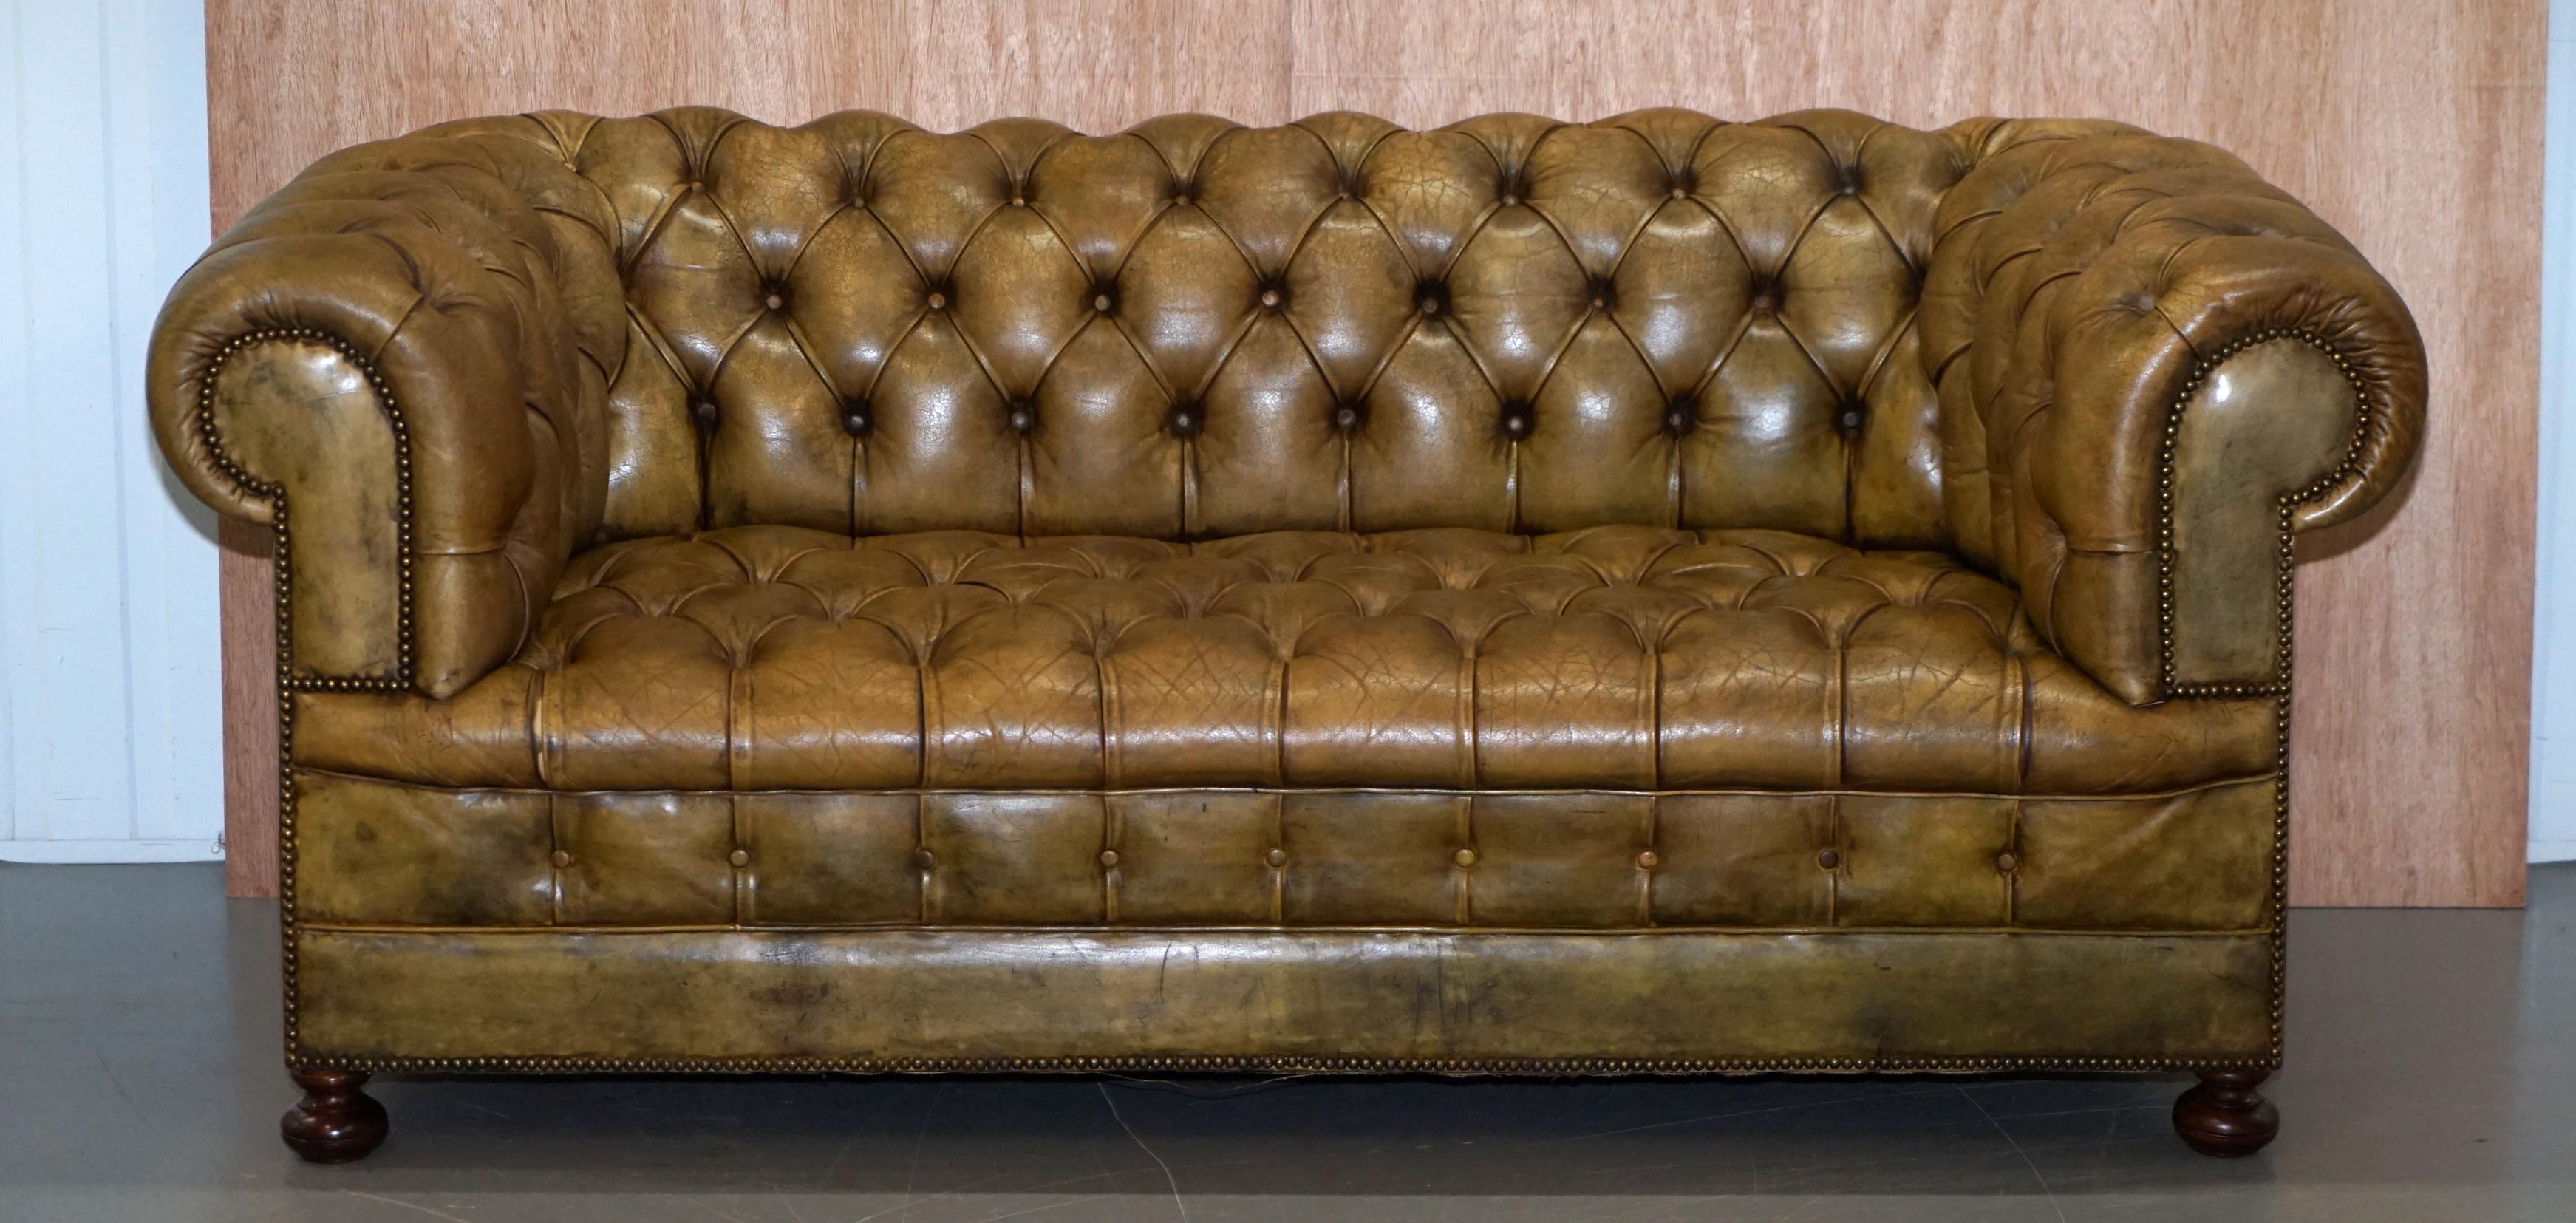 We are delighted to offer for sale this original Victorian horse hair filled hand dyed green leather Chesterfield fully buttoned sofa

A very good looking and well made sofa, the upholstery looks to be the original hand dyed hide, you can tell the